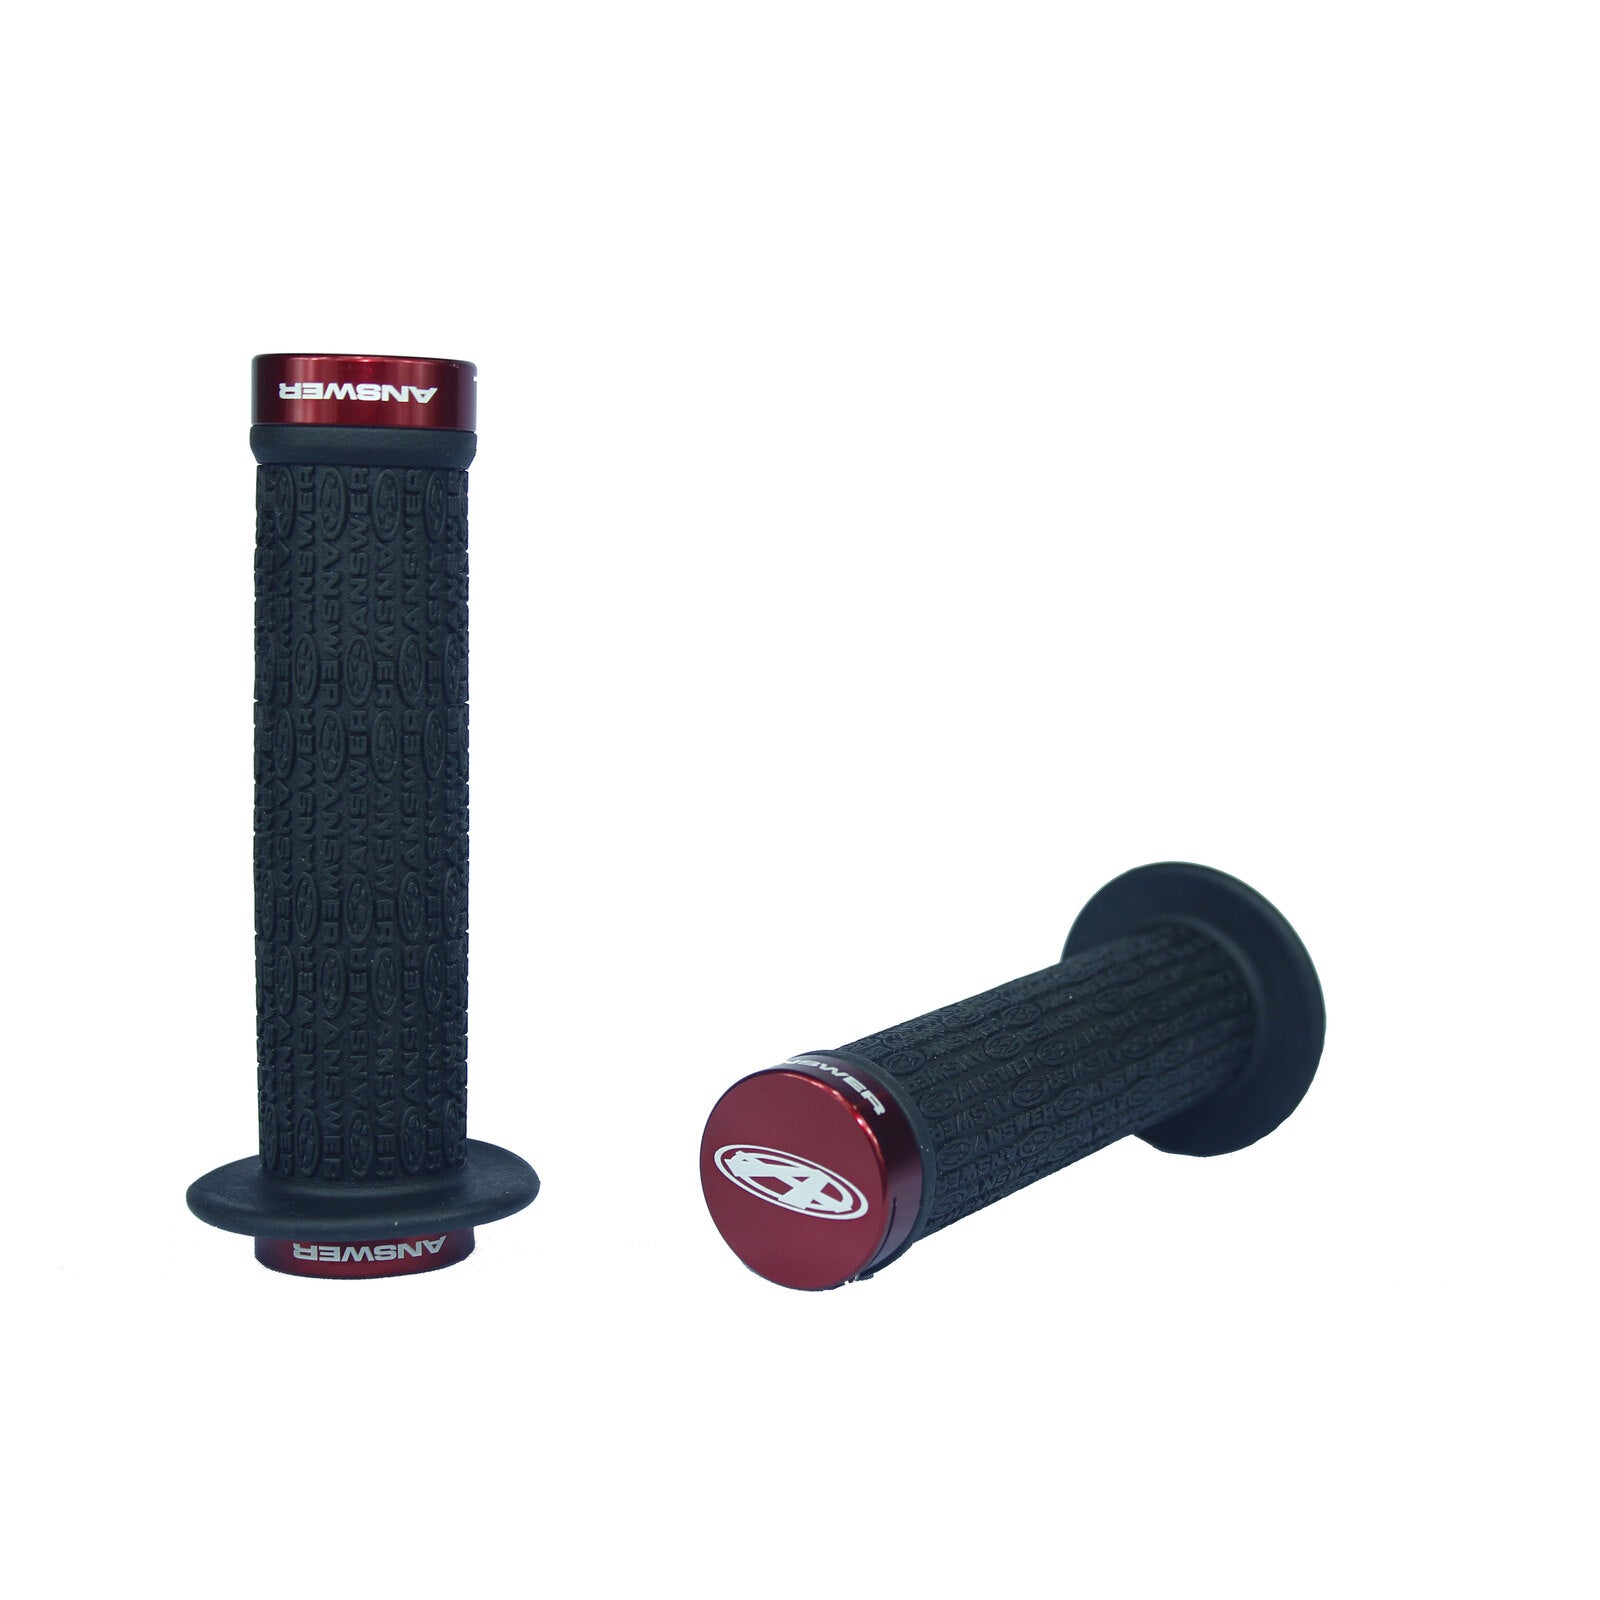 A pair of black and red grips, known as Answer Pro Lock-On Flanged Grips, enhancing the colours of a race bike on a white background.